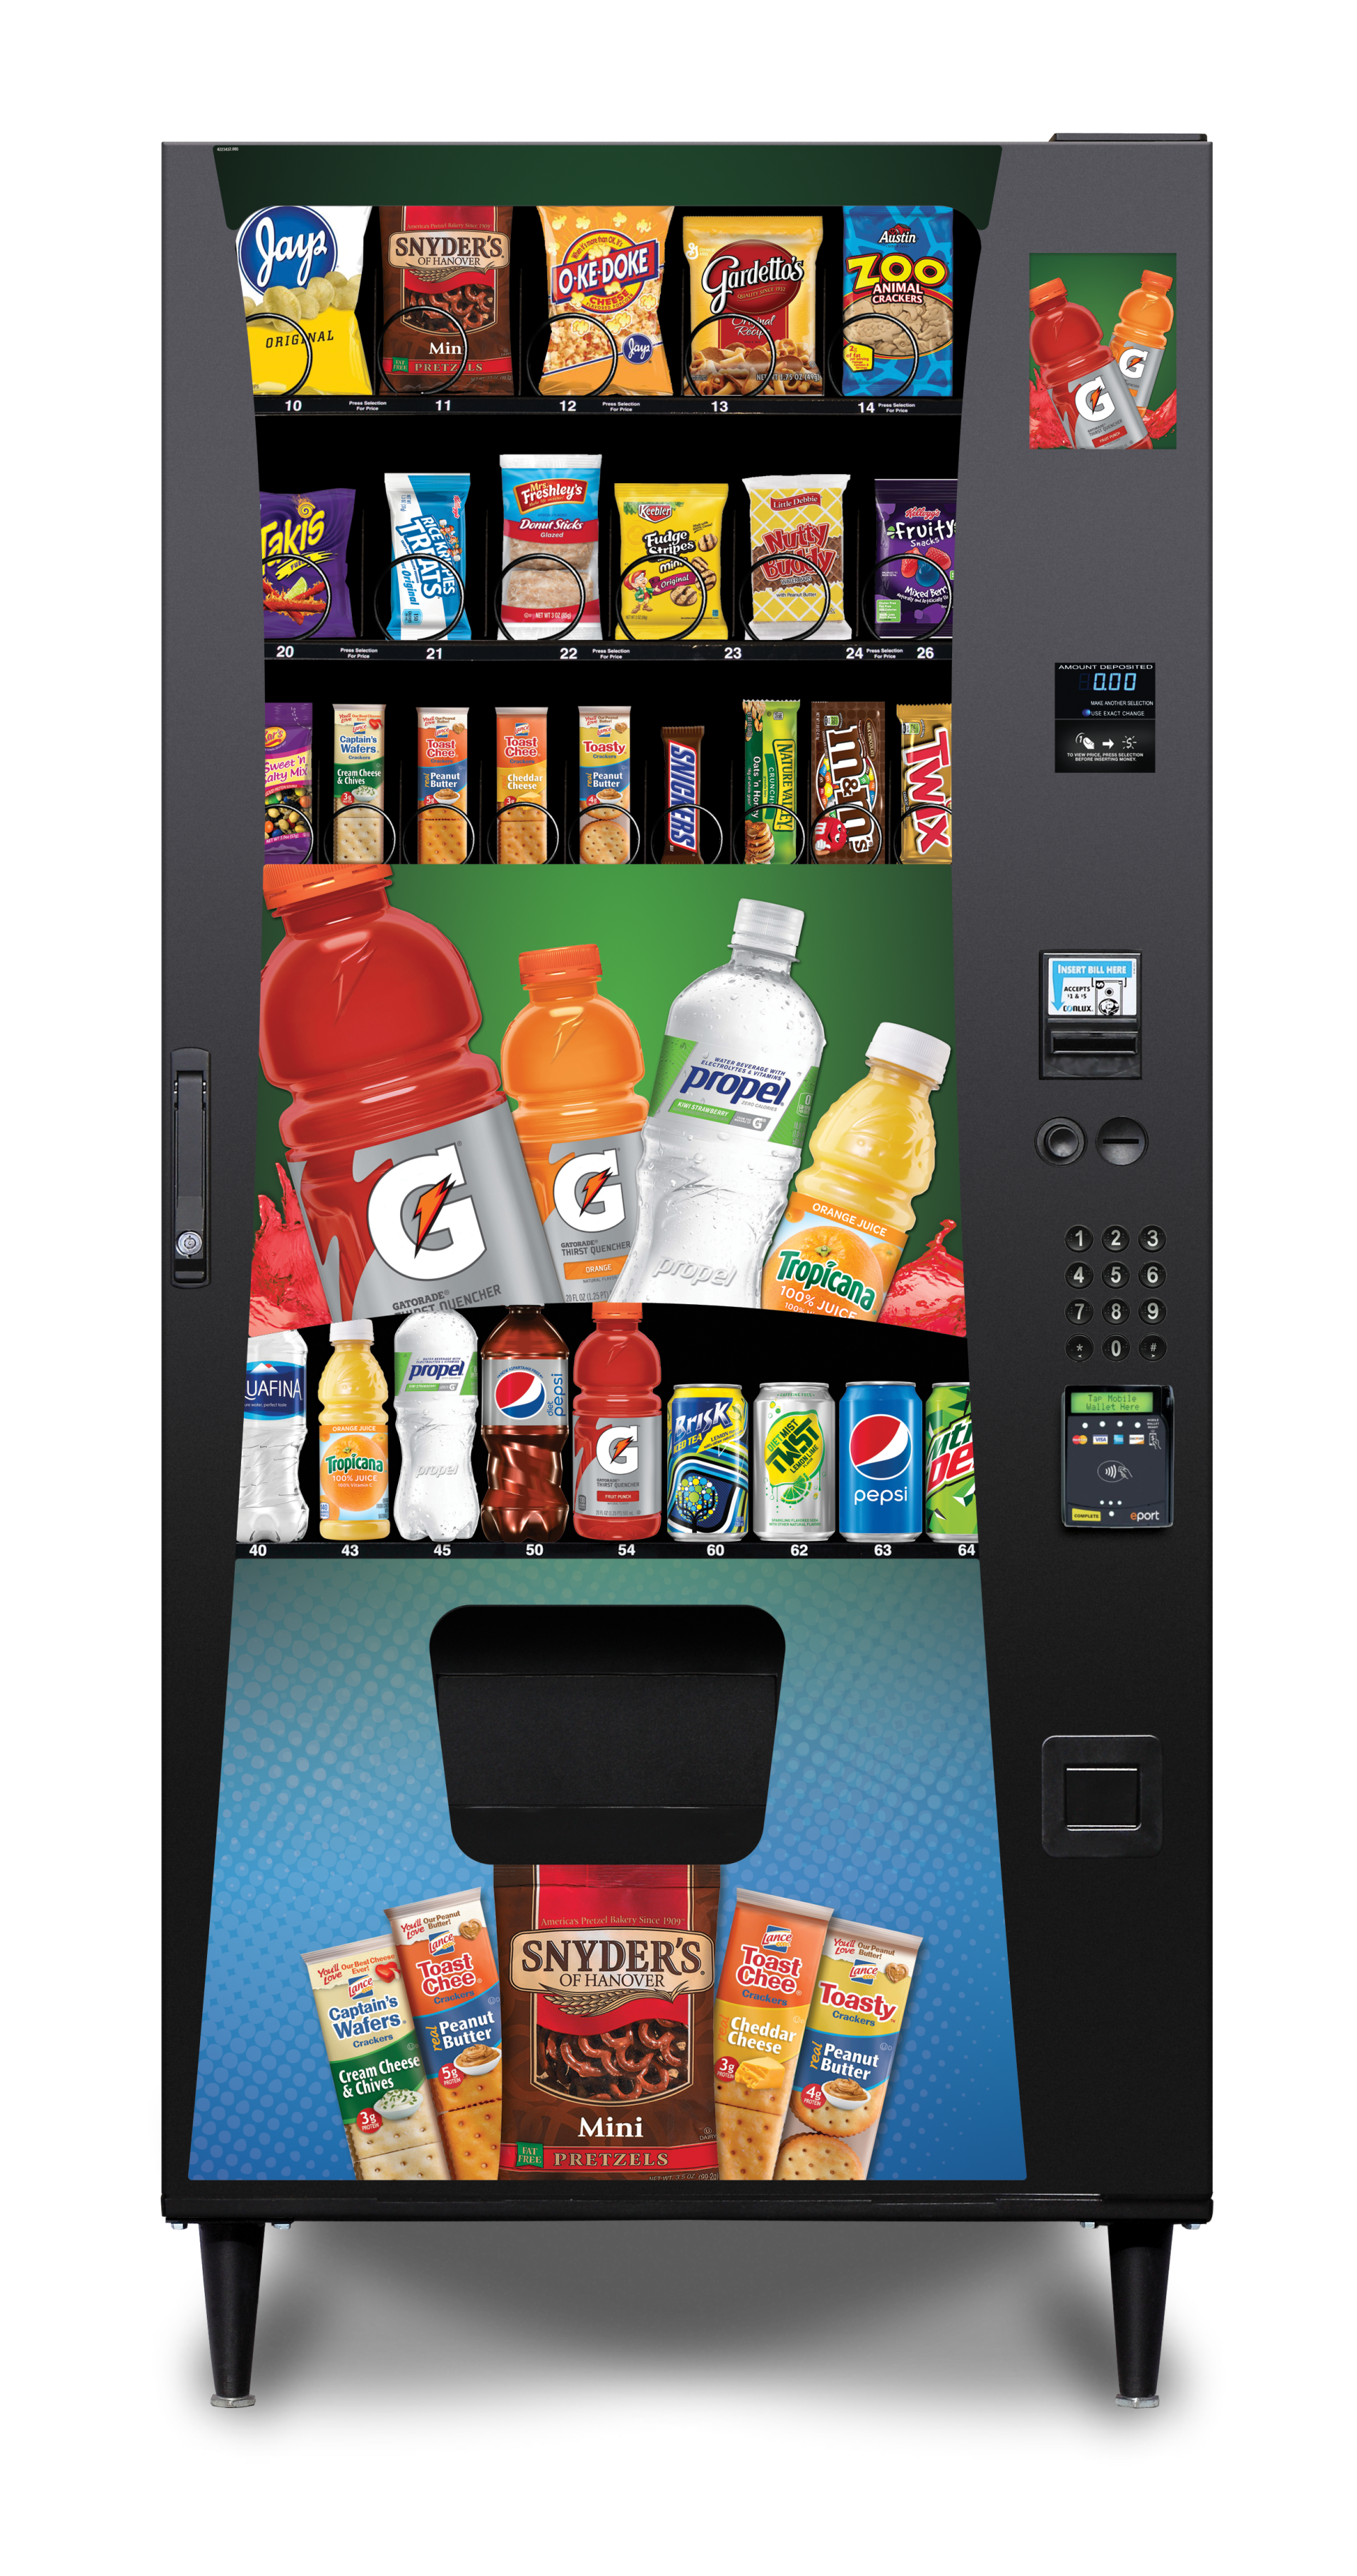 Selectivend SV-4 32-Selection Snack Vending Machine with Credit Card Reader